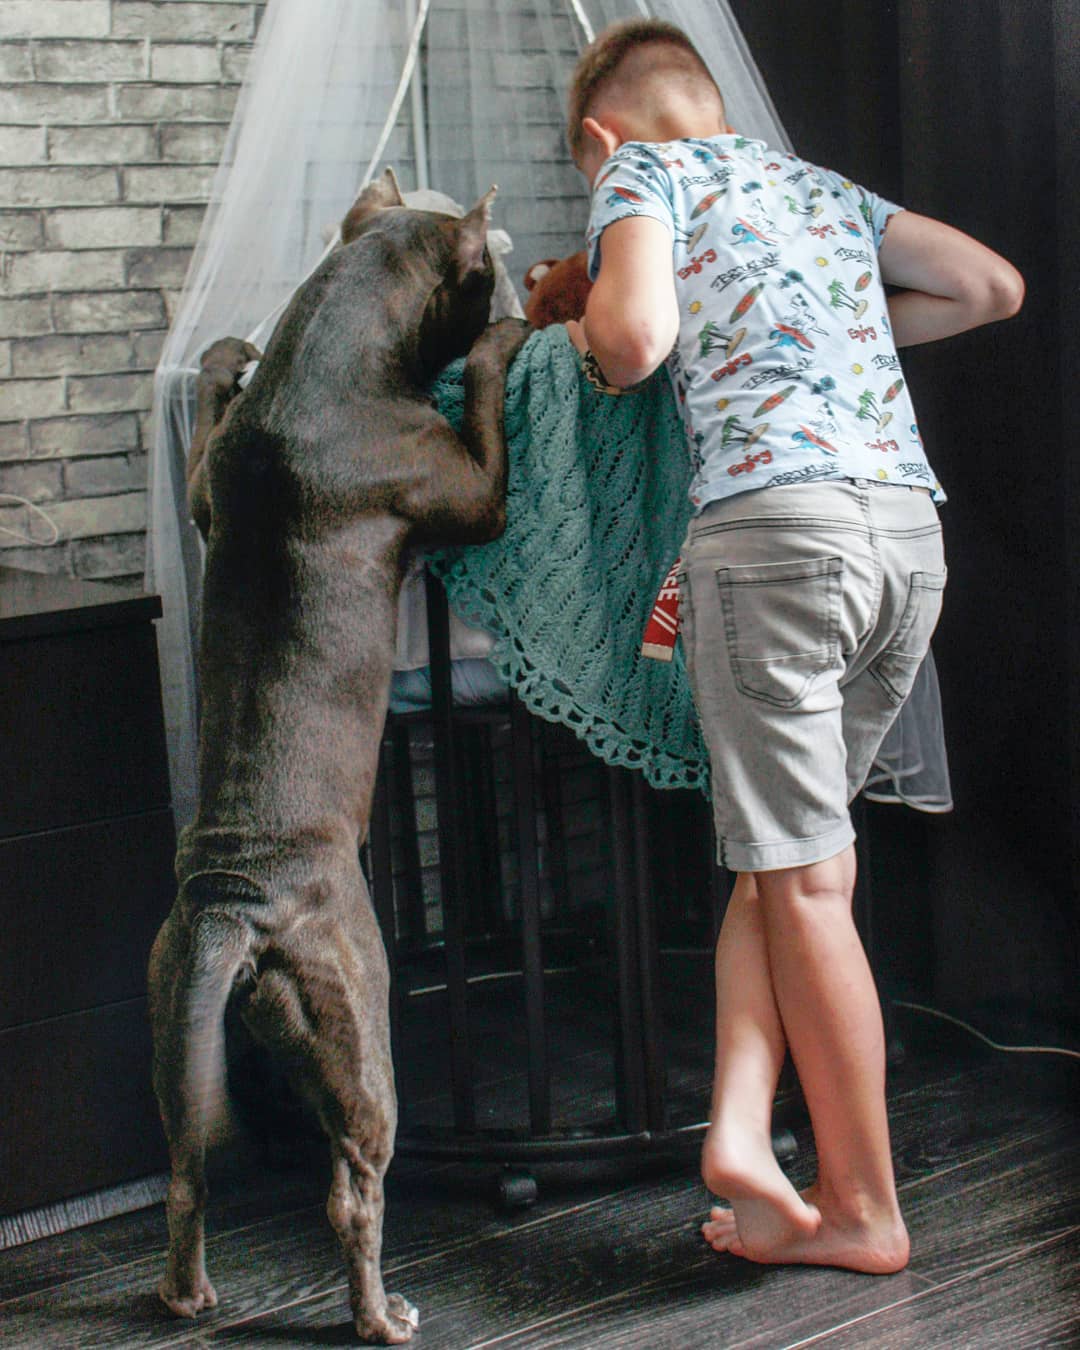 Pit Bull and a kid leaning towards the baby's crib